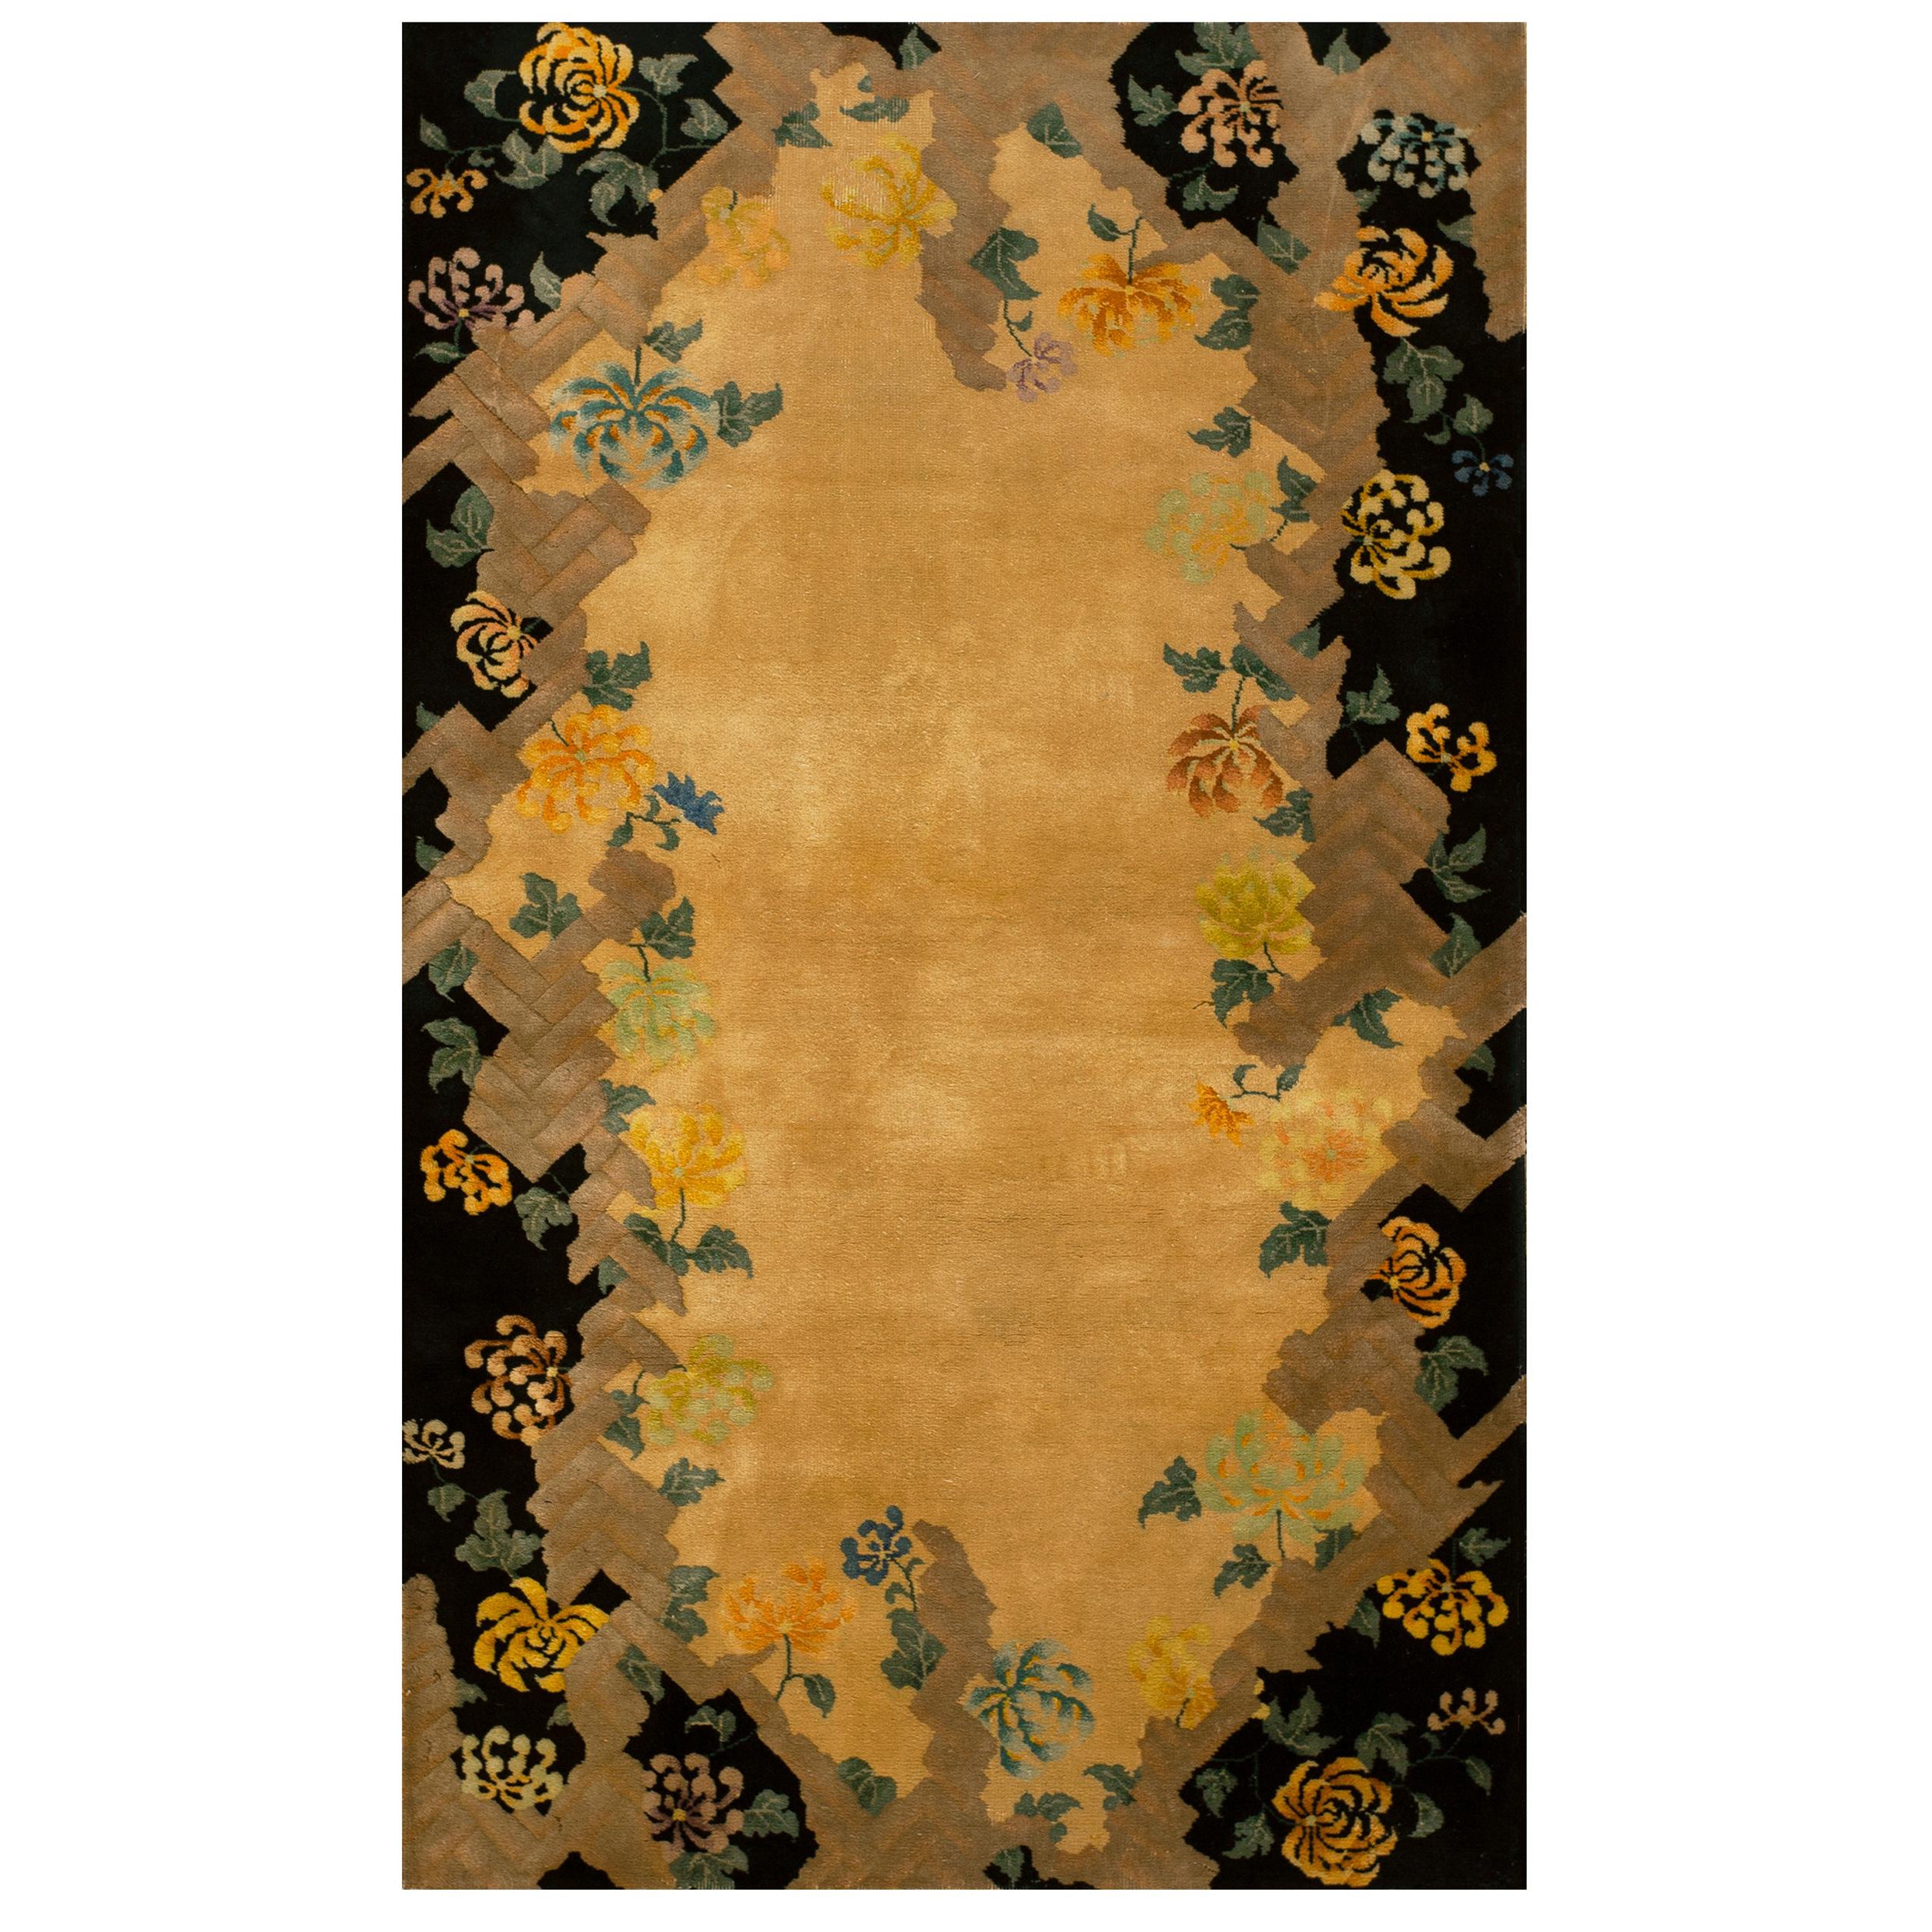 1920s Chinese Art Deco Rug by Nichols Workshop ( 4' x 6'8'' - 122 x 203 ) For Sale